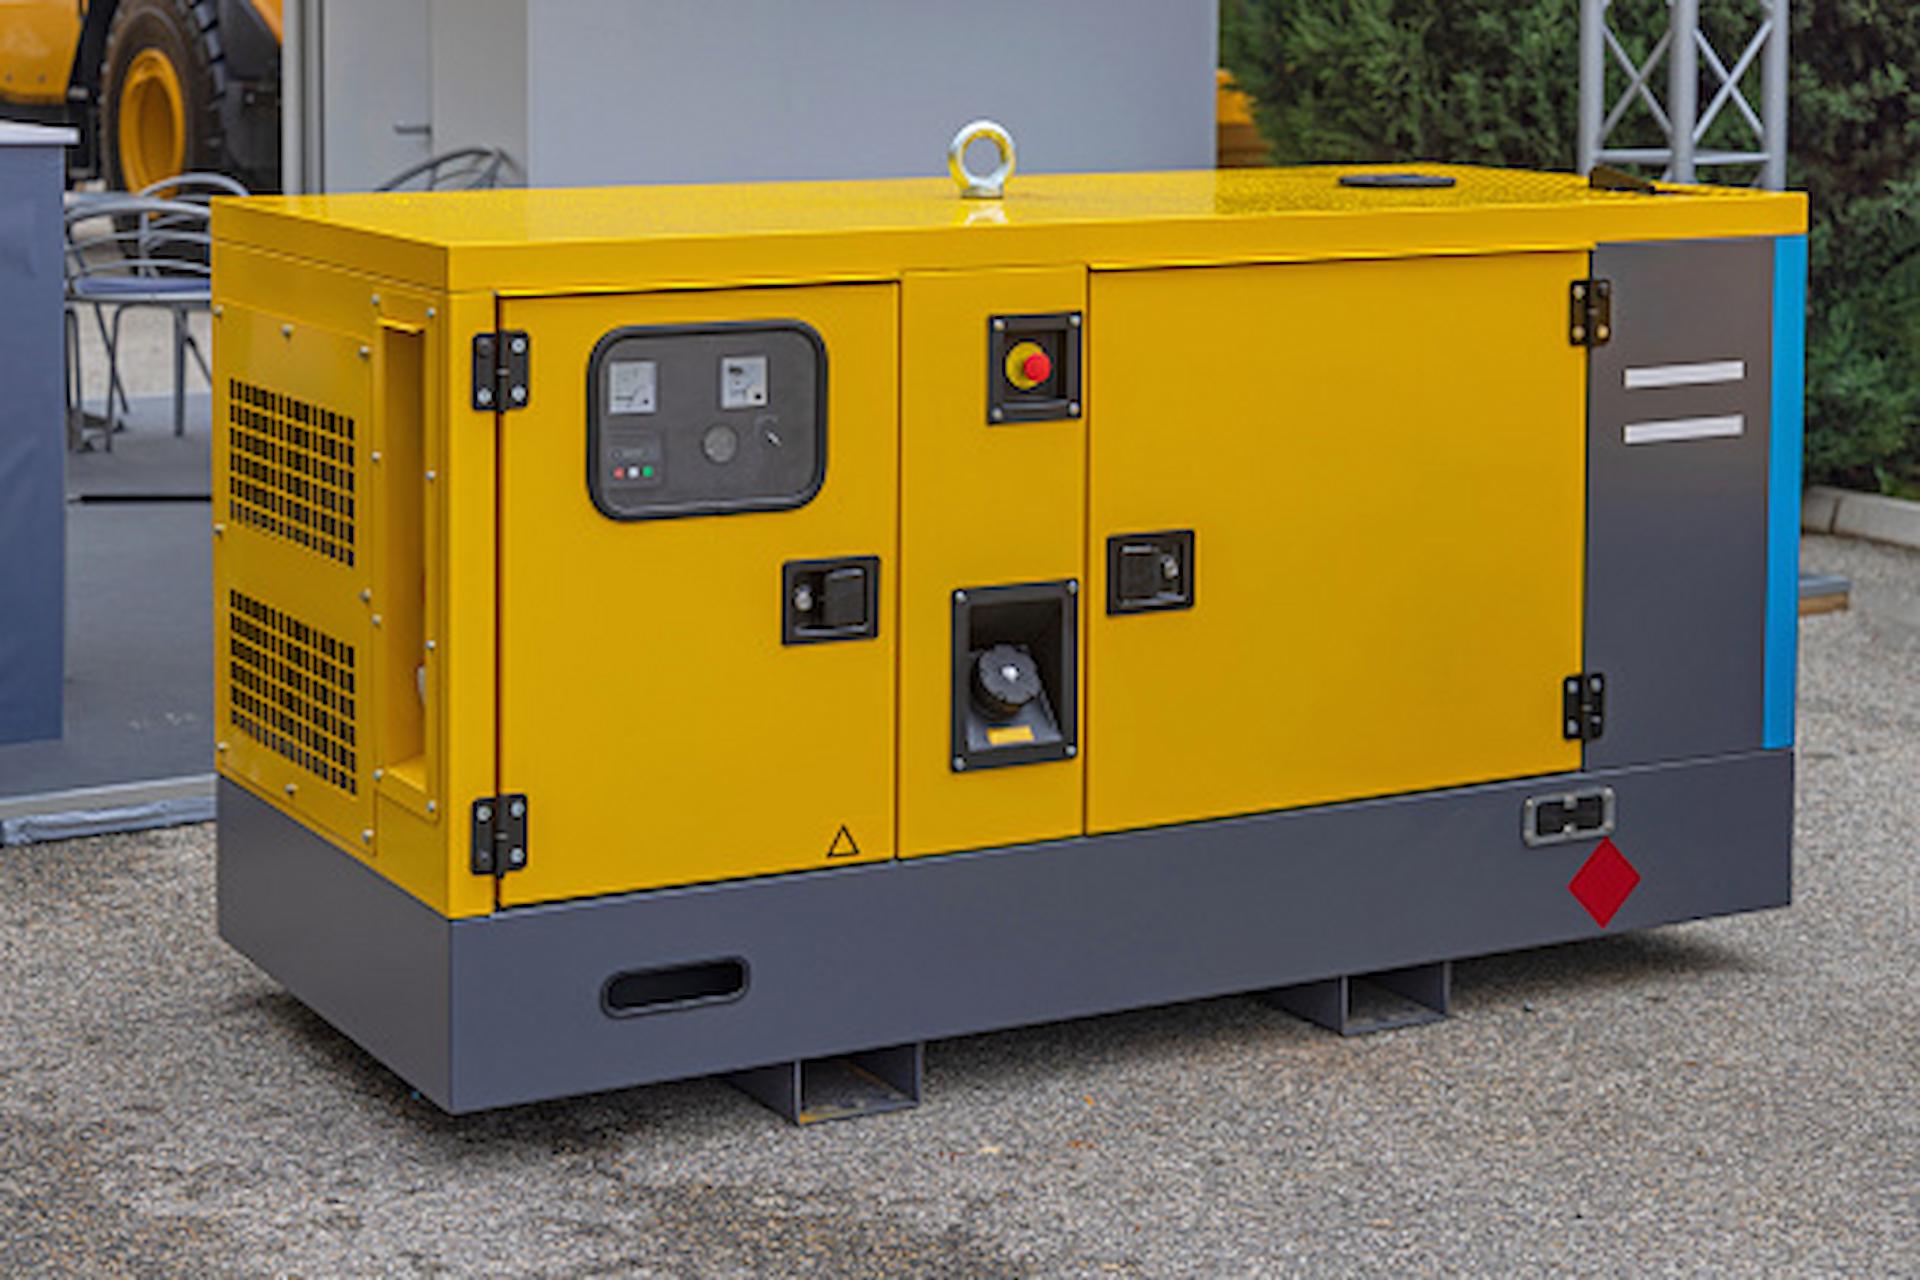 Top Benefits Of Renting A Generator Instead Of Buying One